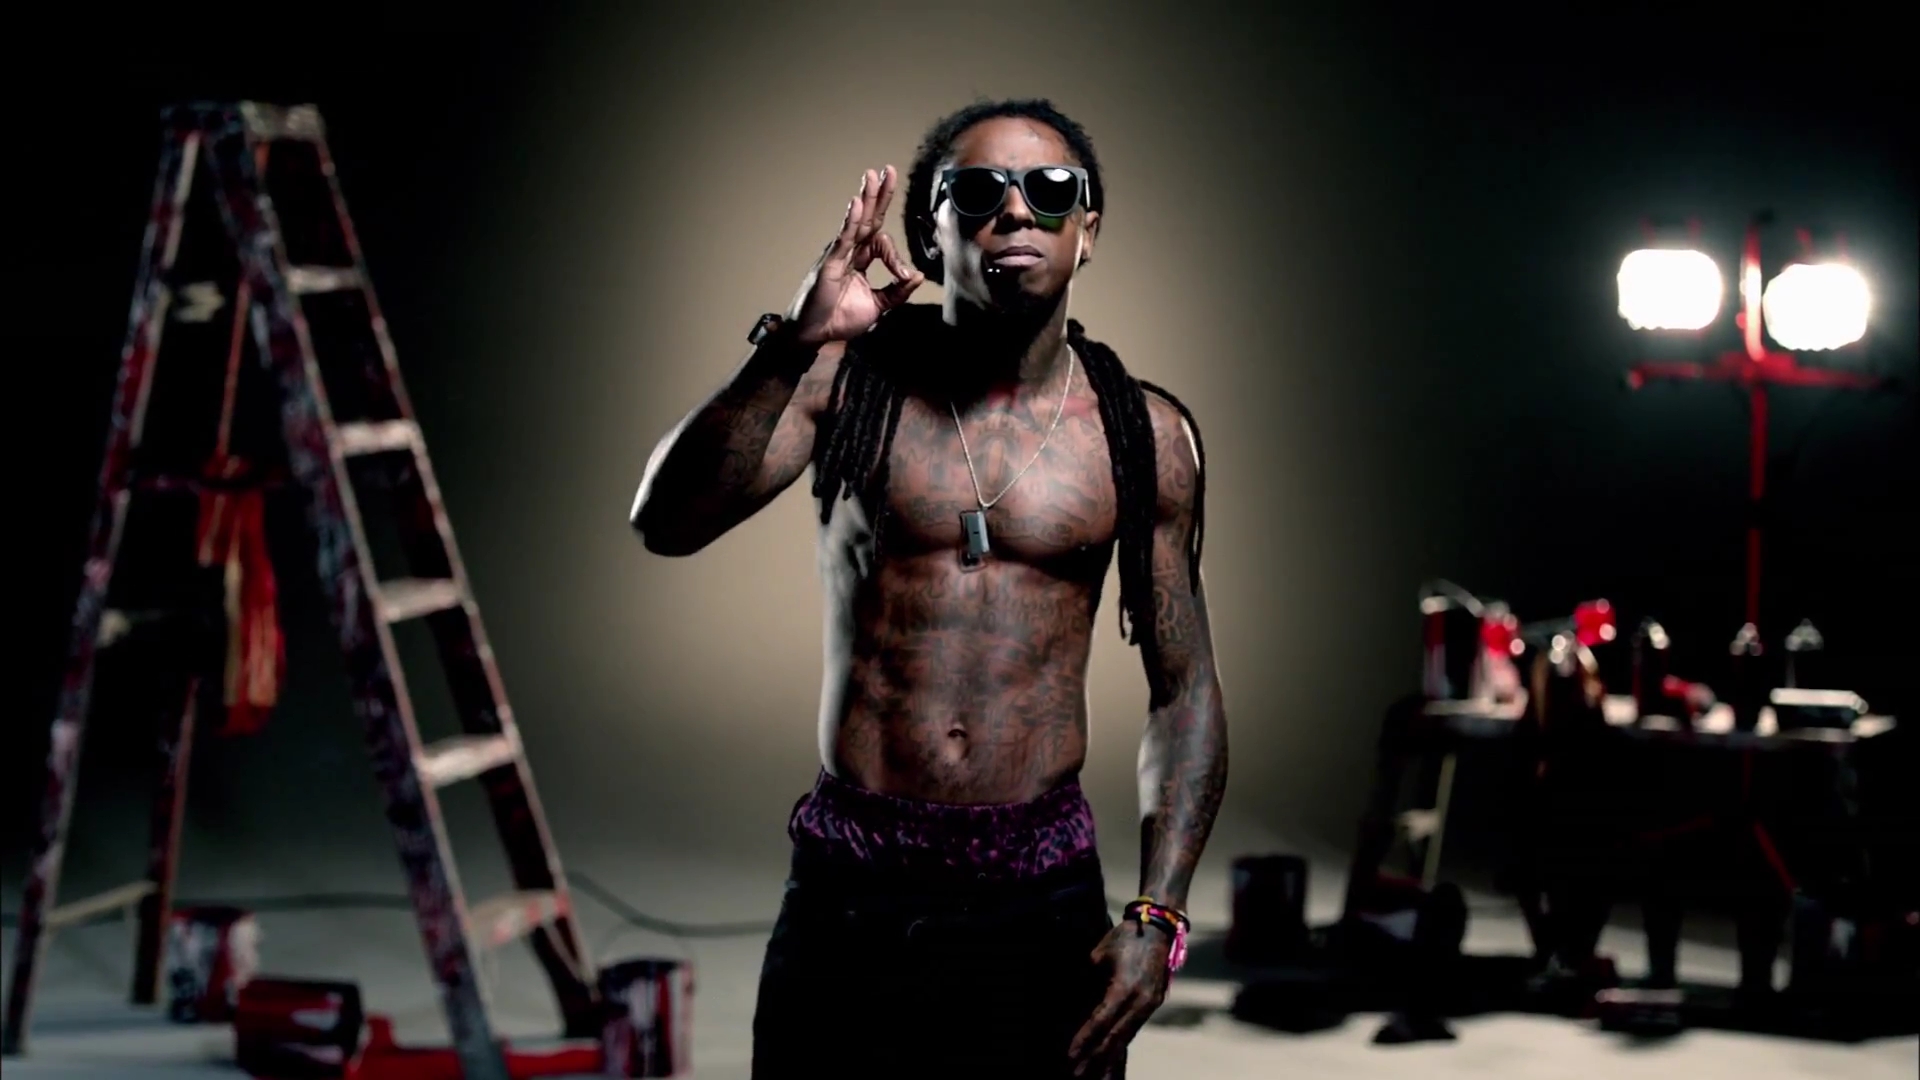 Lil Wayne Wallpapers   Wallpaper High Definition High Quality